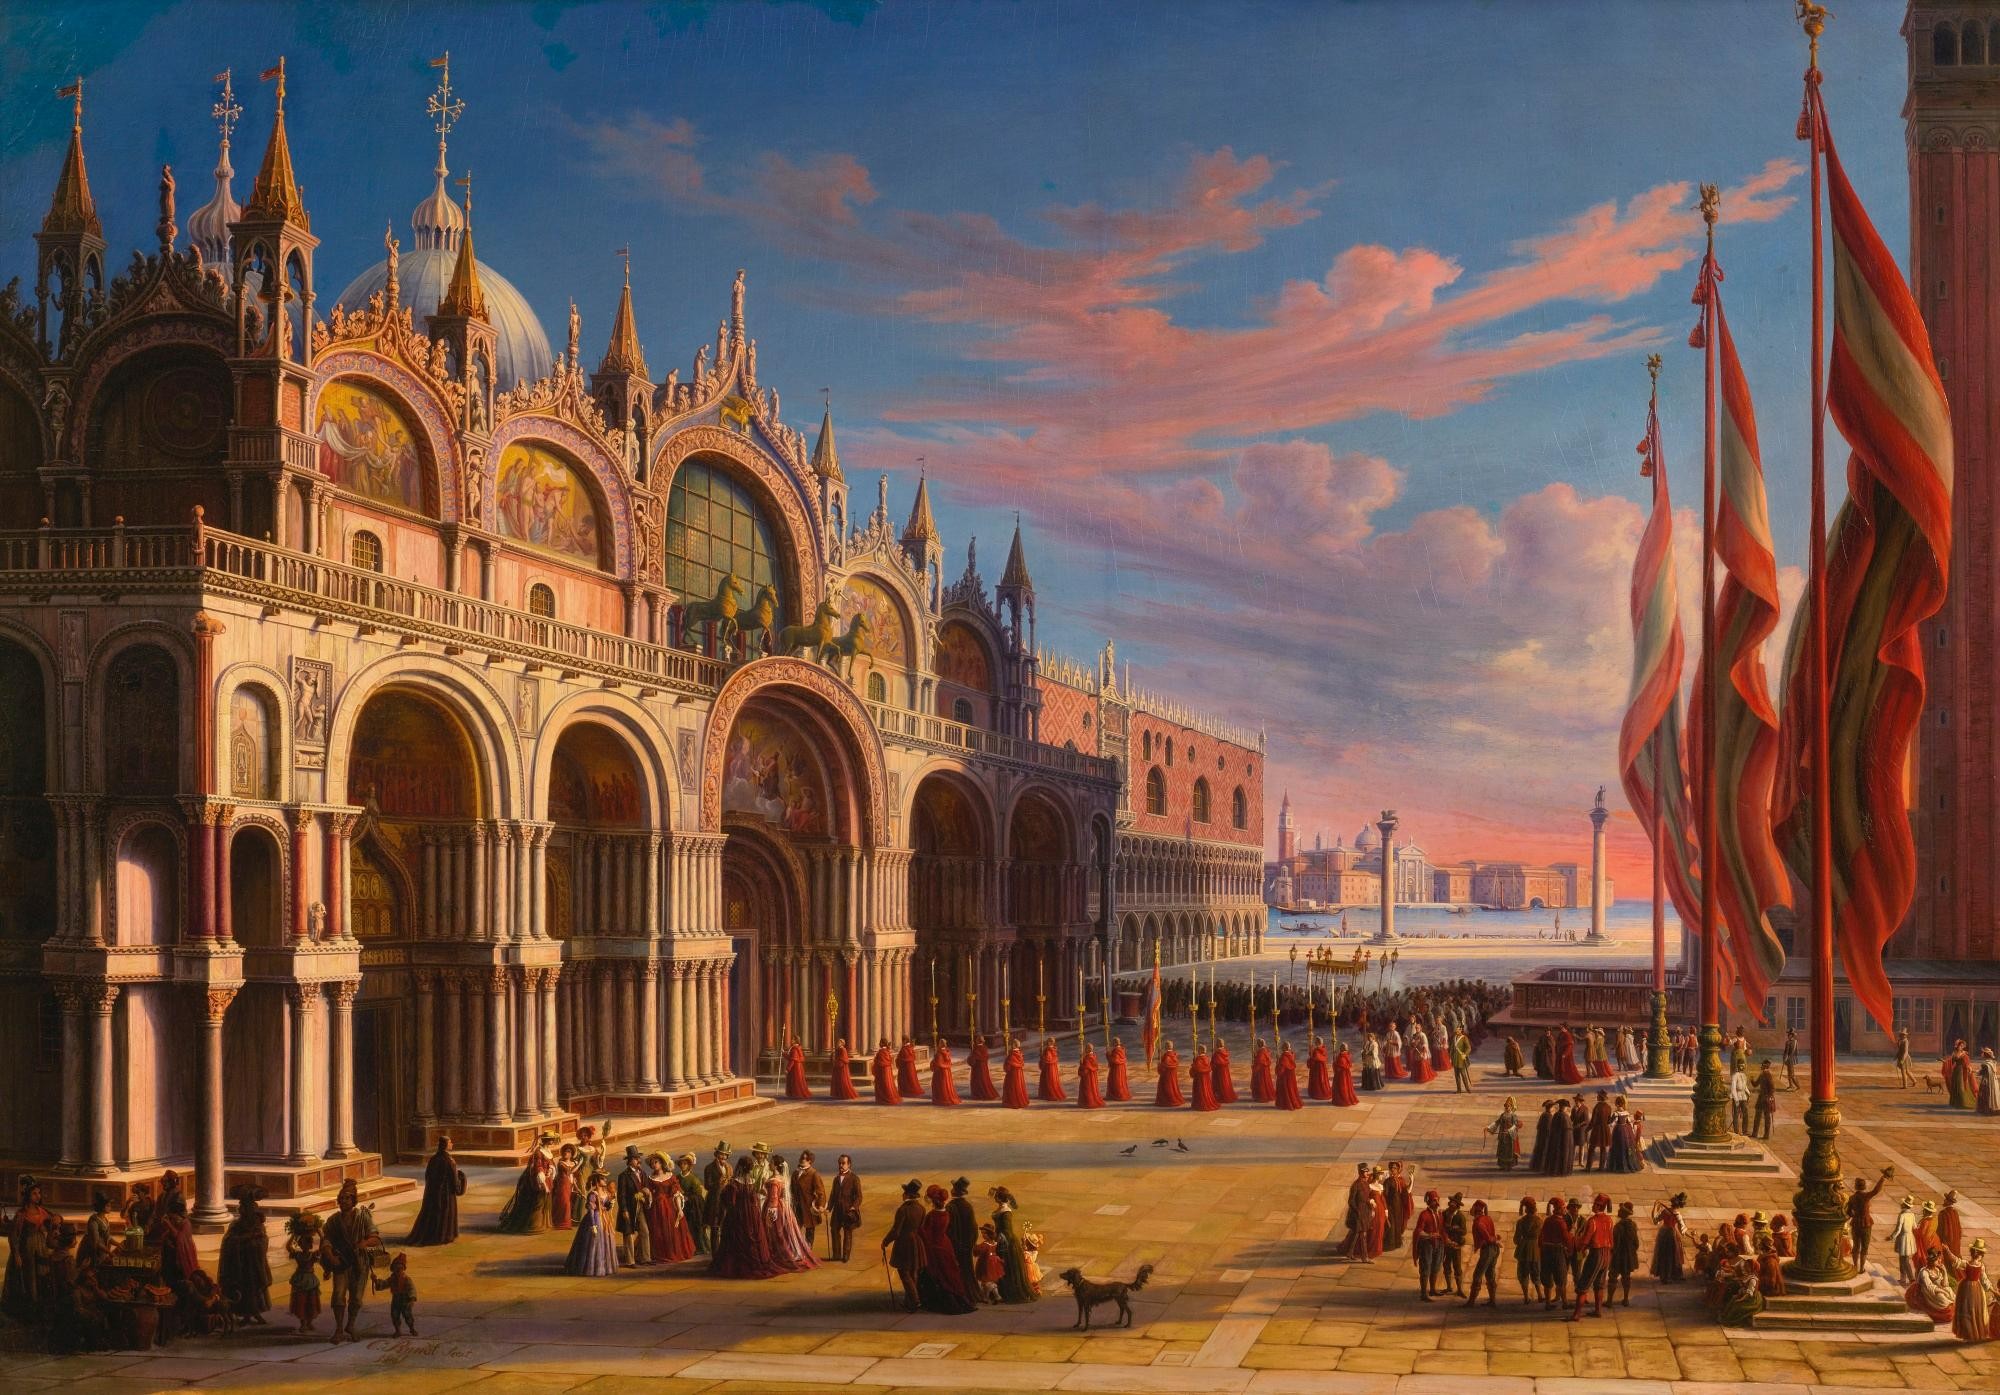 Carl Ludwig Rundt, People, Crowds, Artwork, Painting, Classic art, Traditional art, Venice, Italy, Architecture, Town square, Flag, Clouds Wallpaper